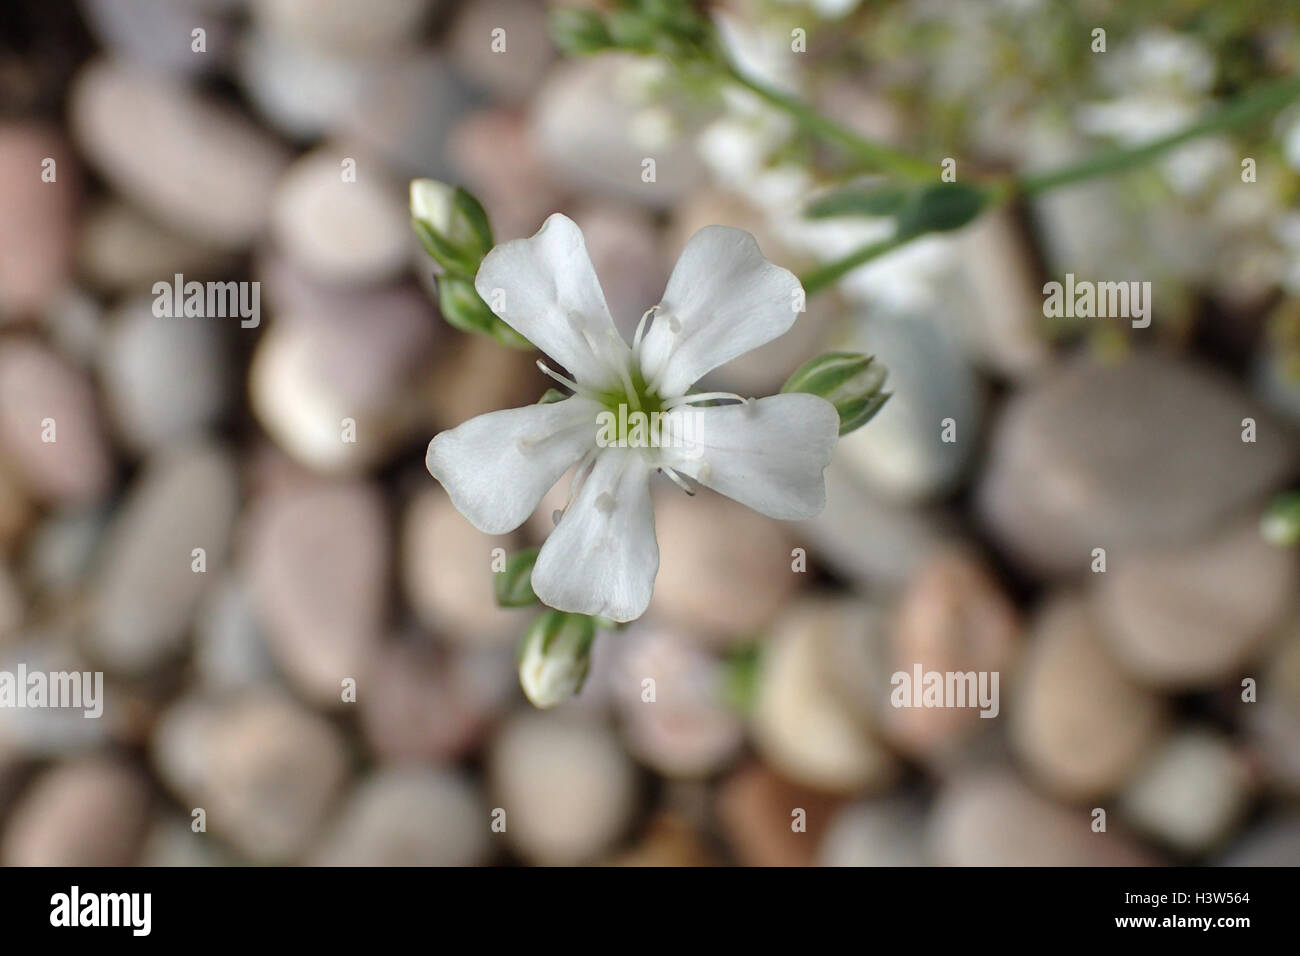 Close up of creeping gypsophila (Gypsophila repens 'filou white') flower and buds in front of blurred small pebbles Stock Photo